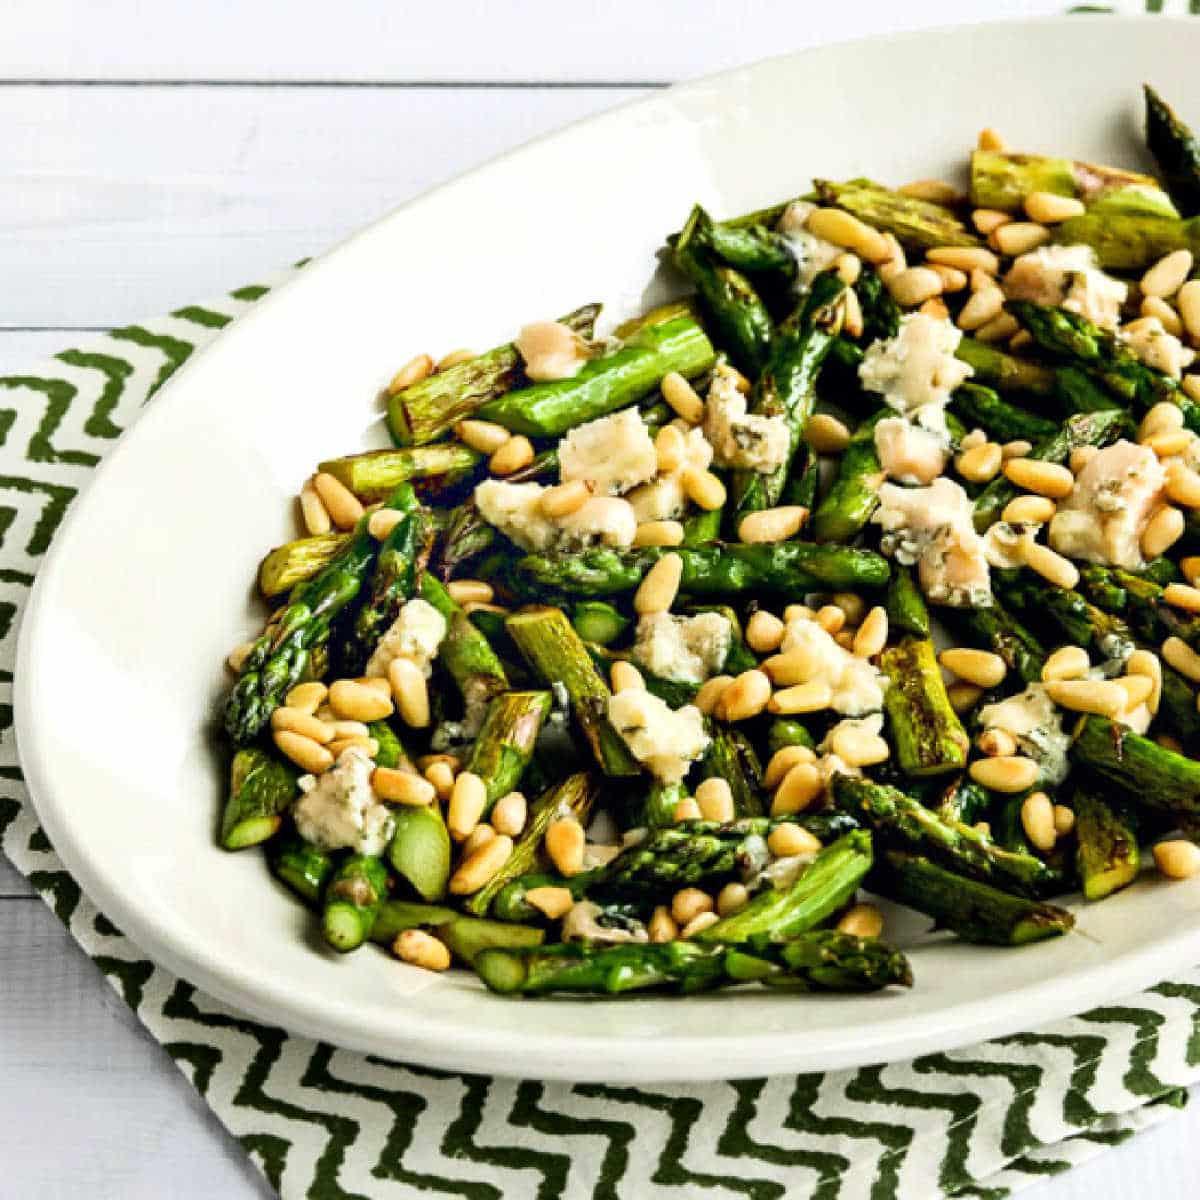 Square image of frying asparagus with gorgonzola and pine nuts on a serving plate